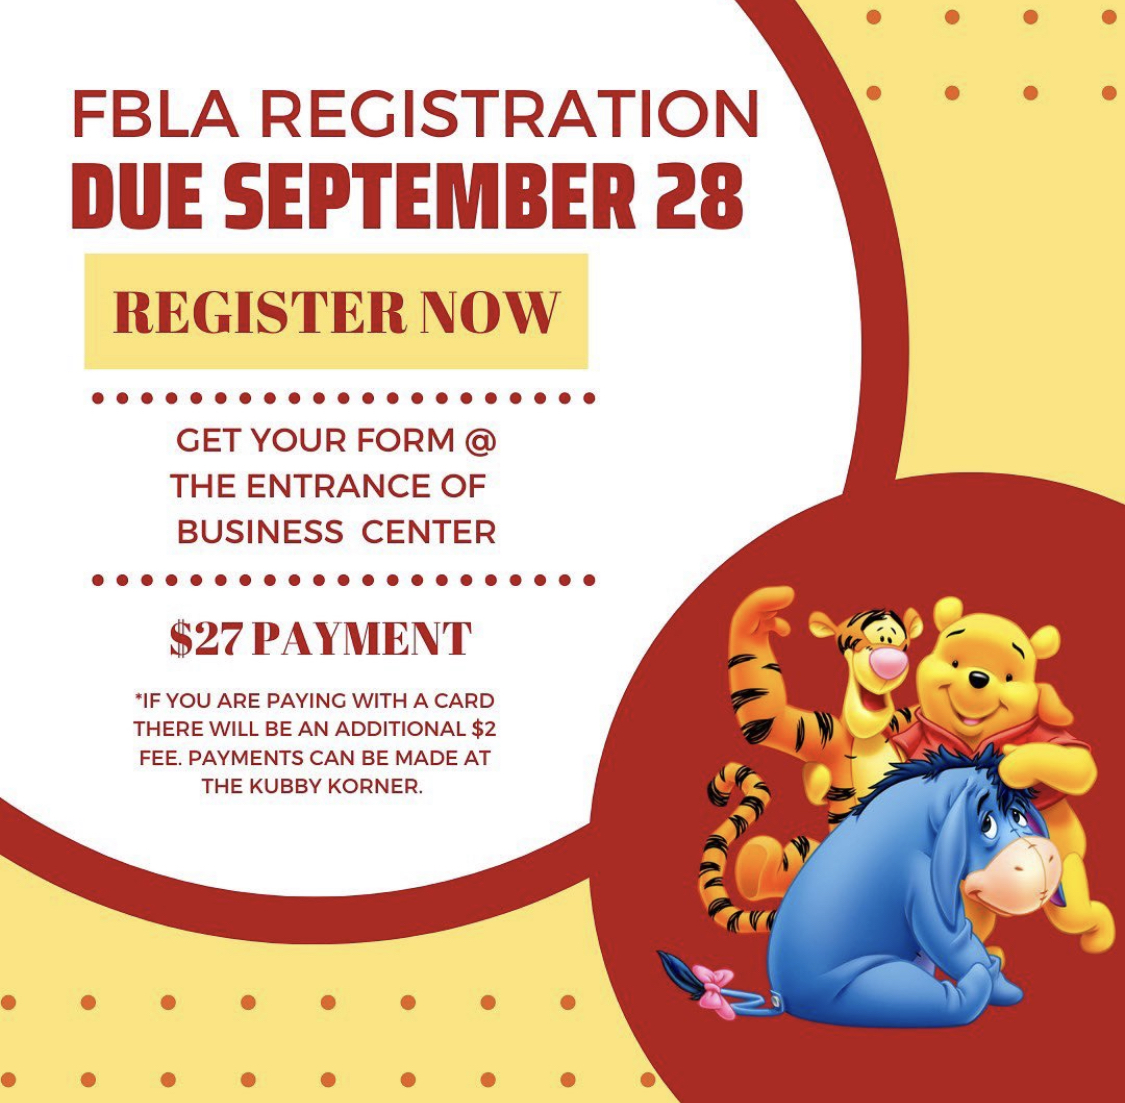 A picture showing registration information posted on the FBLA Instagram.